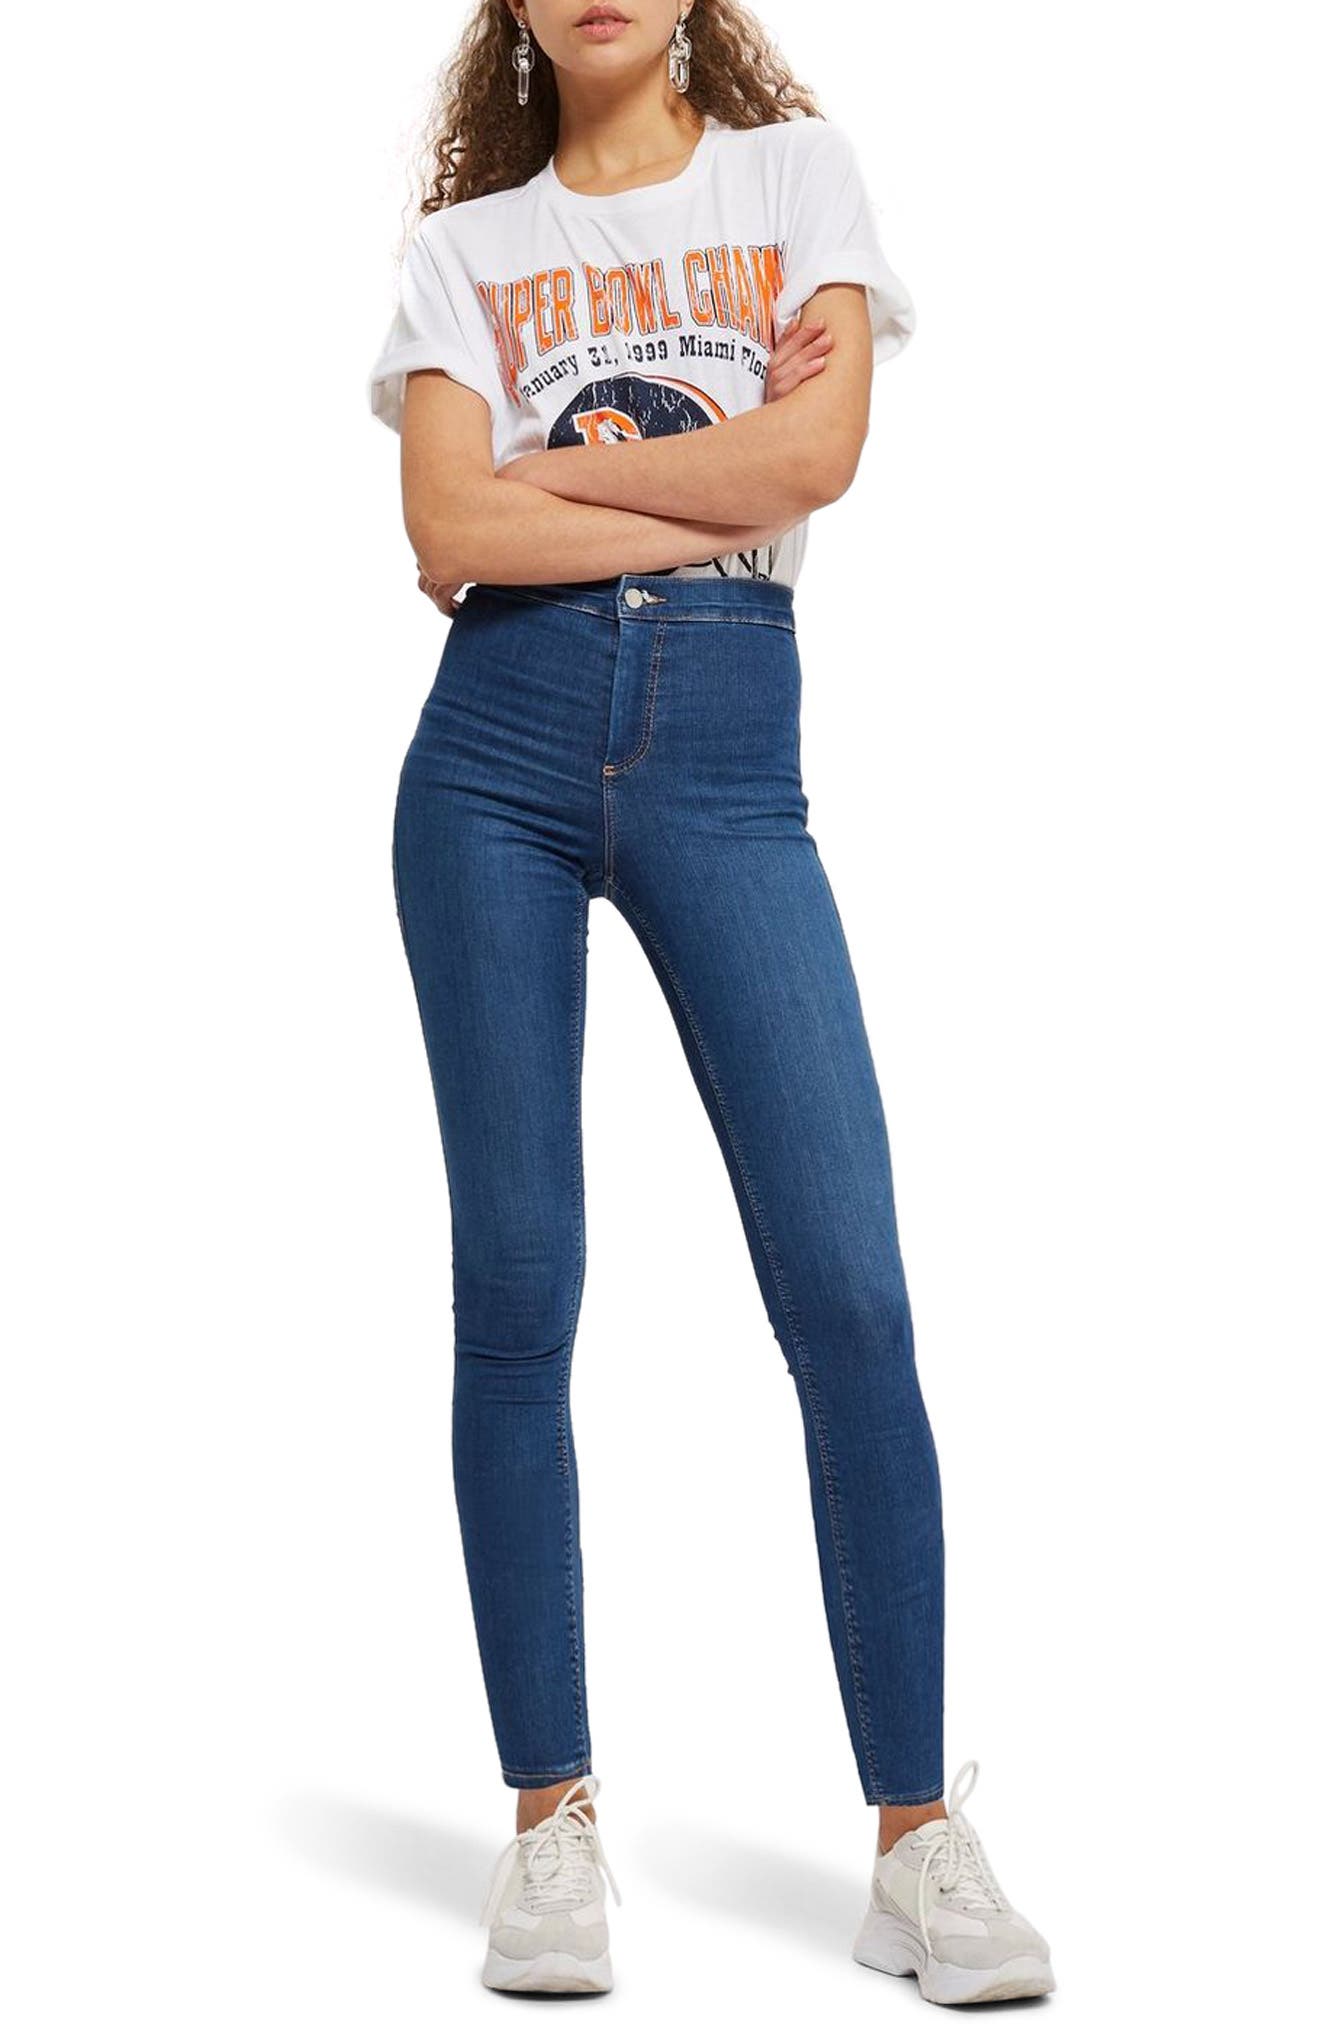 12 Best High-Waisted Jeans for Women, According to Stylists